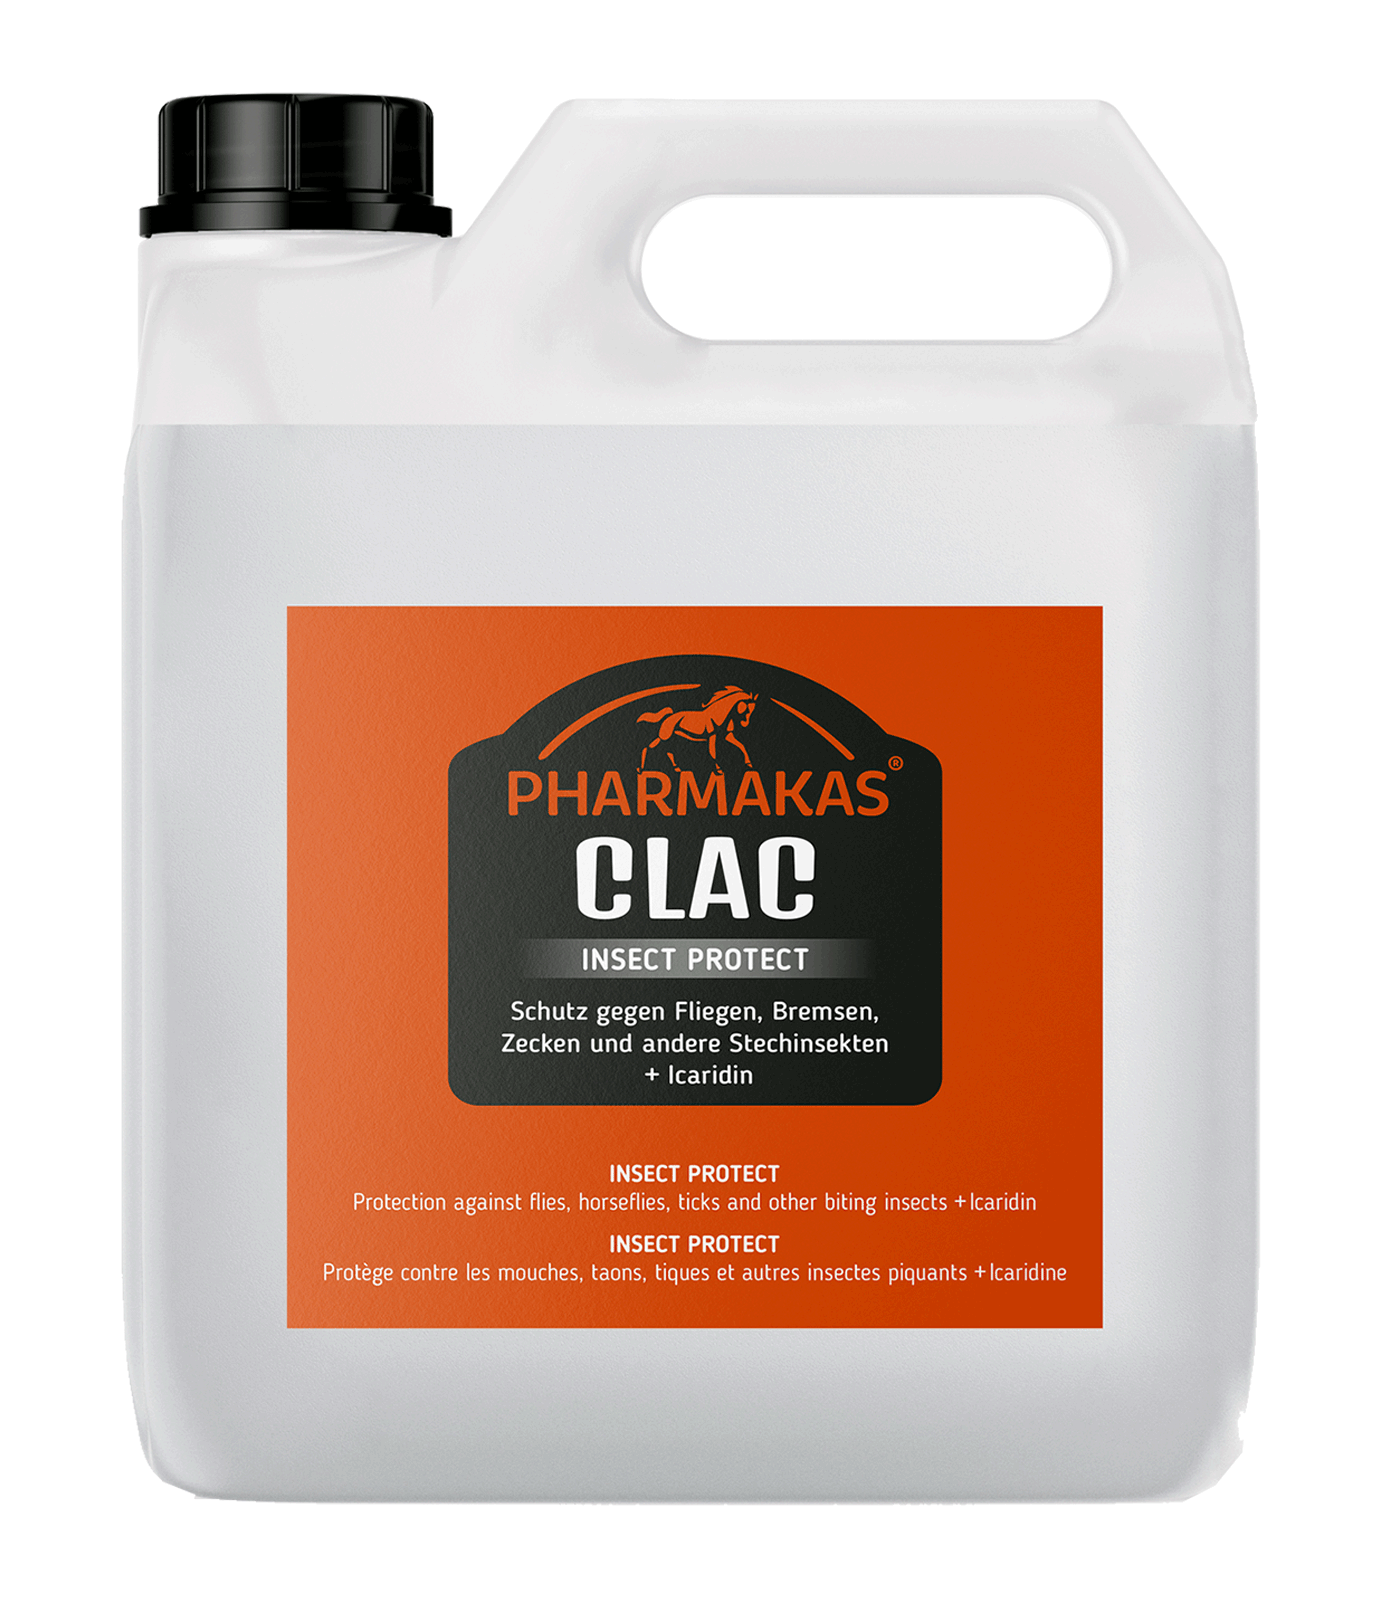 Pharmakas® CLAC Insect Protect